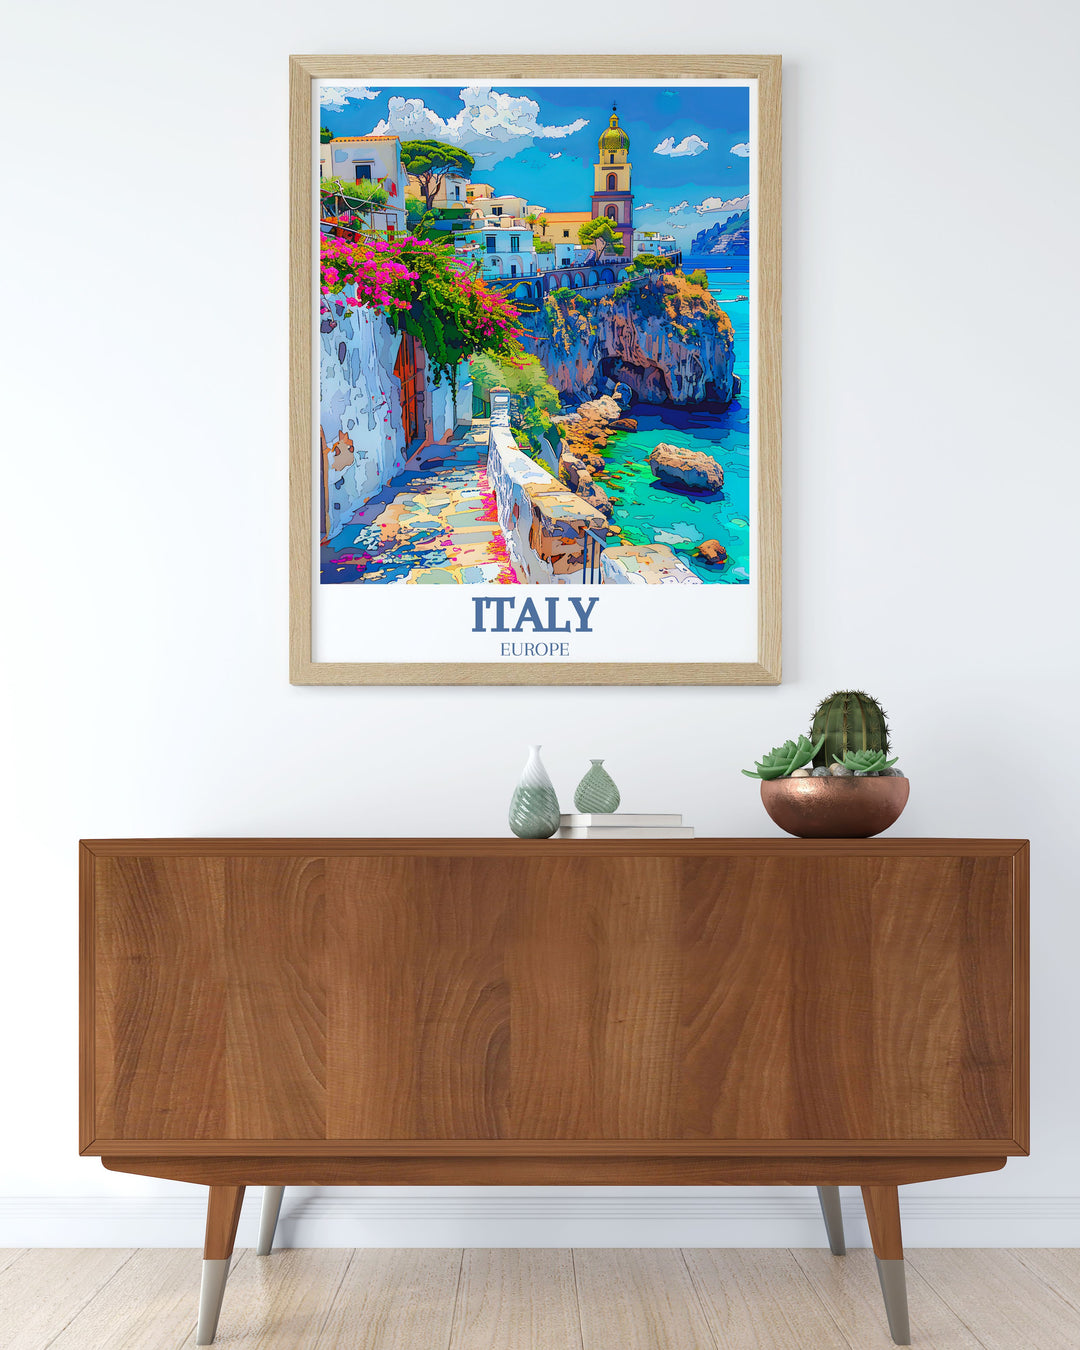 Featuring the Amalfi Coasts dramatic cliffs and the iconic Campanile Bell Tower, this poster brings the essence of Italys scenic beauty and historical landmarks into your living space.